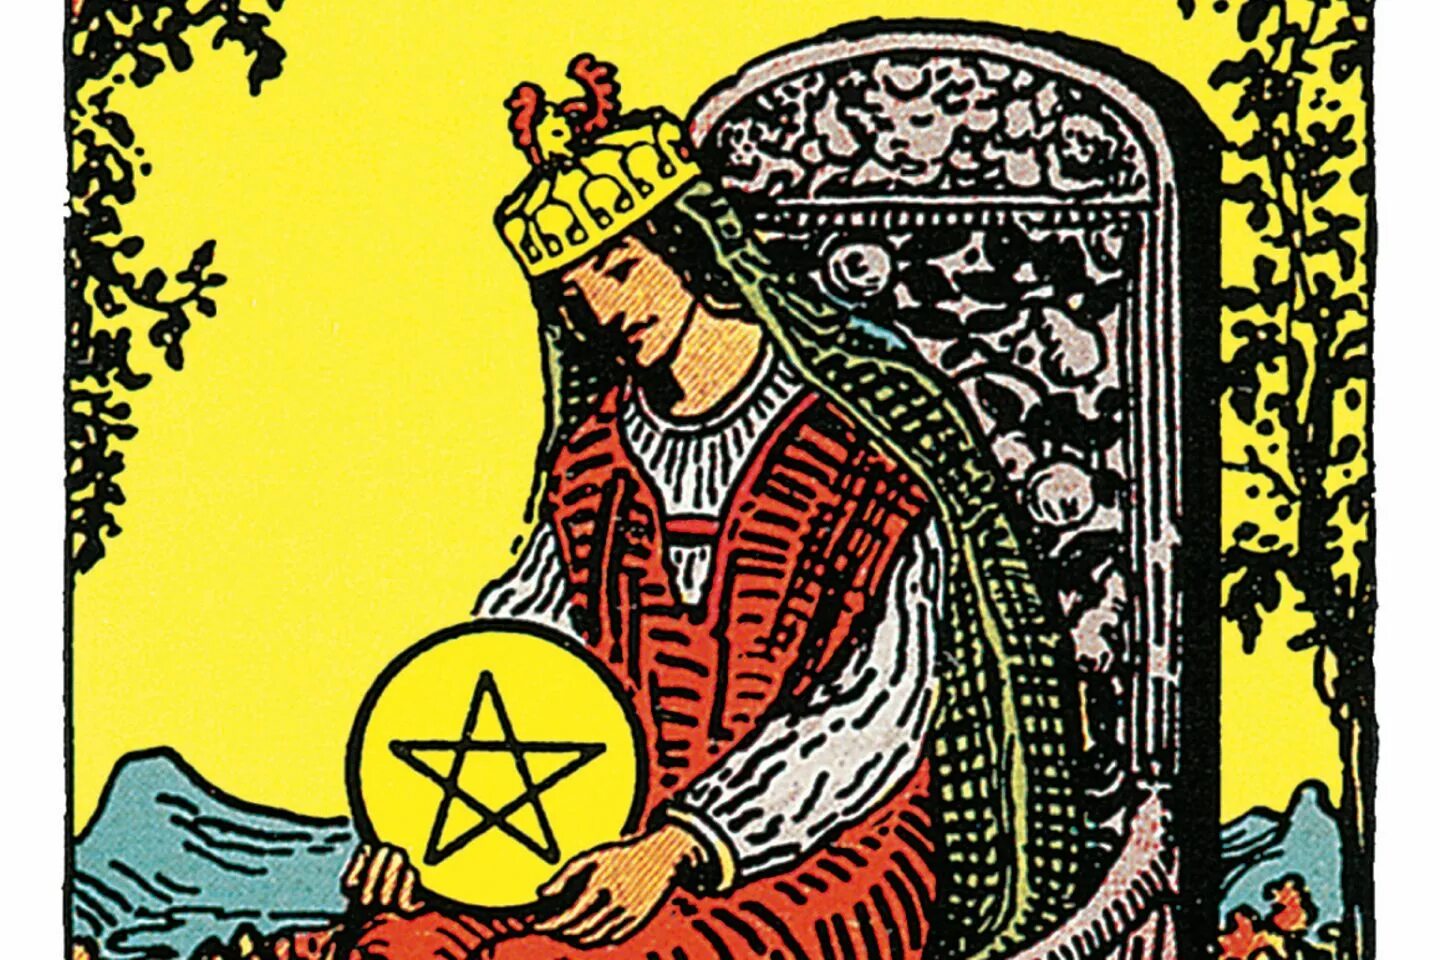 Queen of Pentacles Таро. Королева пентаклей Таро Уэйта. Карта Таро Королева пентаклей. Король пентаклей Уэйт. Значение карты таро король пентаклей